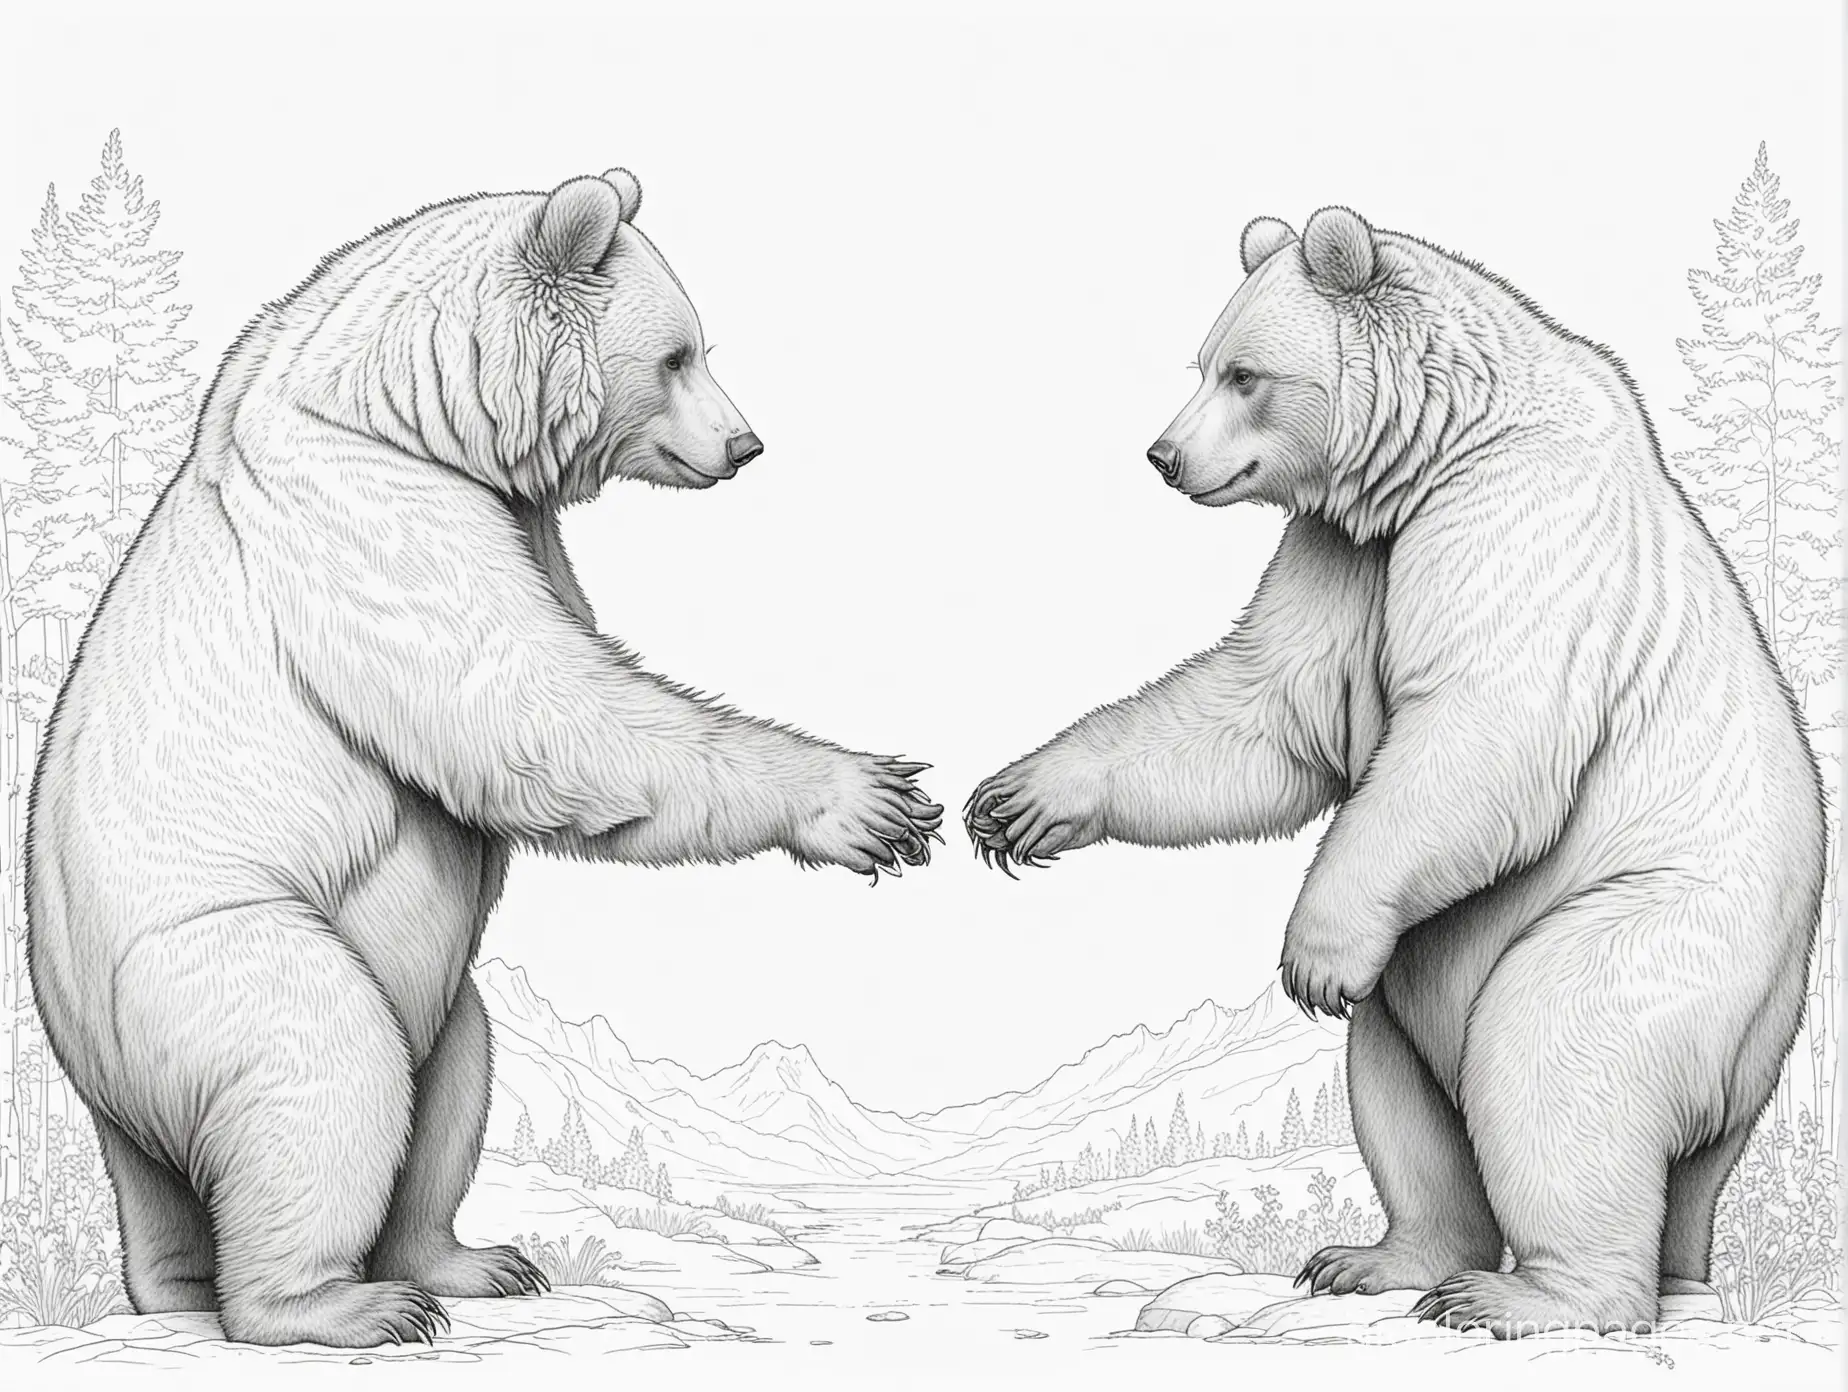 Grizzly-Bears-Handshake-Coloring-Page-for-Kids-Simple-Black-and-White-Line-Art